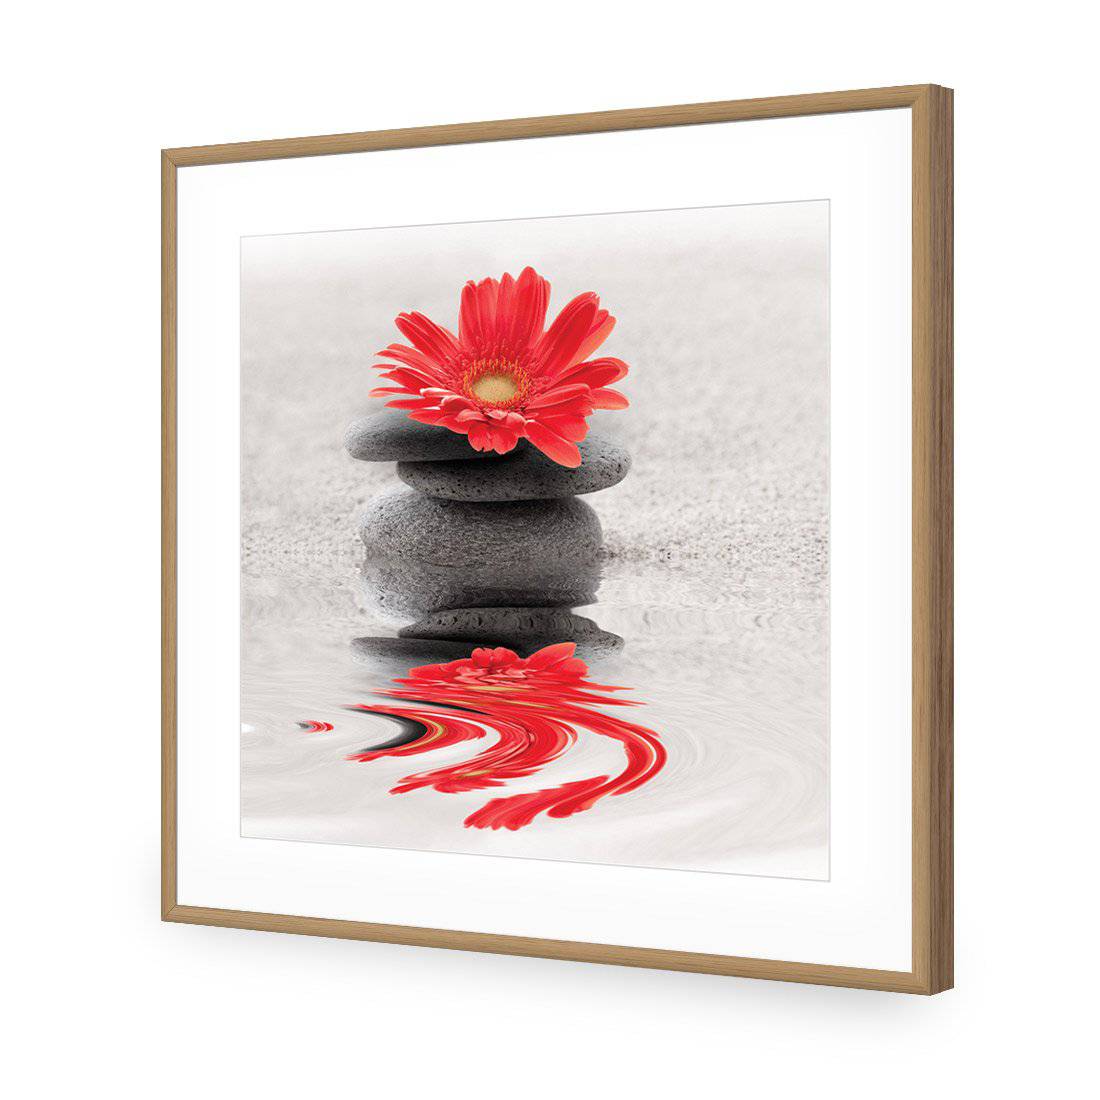 Red Flower Reflection, Square-Acrylic-Wall Art Design-With Border-Acrylic - Oak Frame-37x37cm-Wall Art Designs